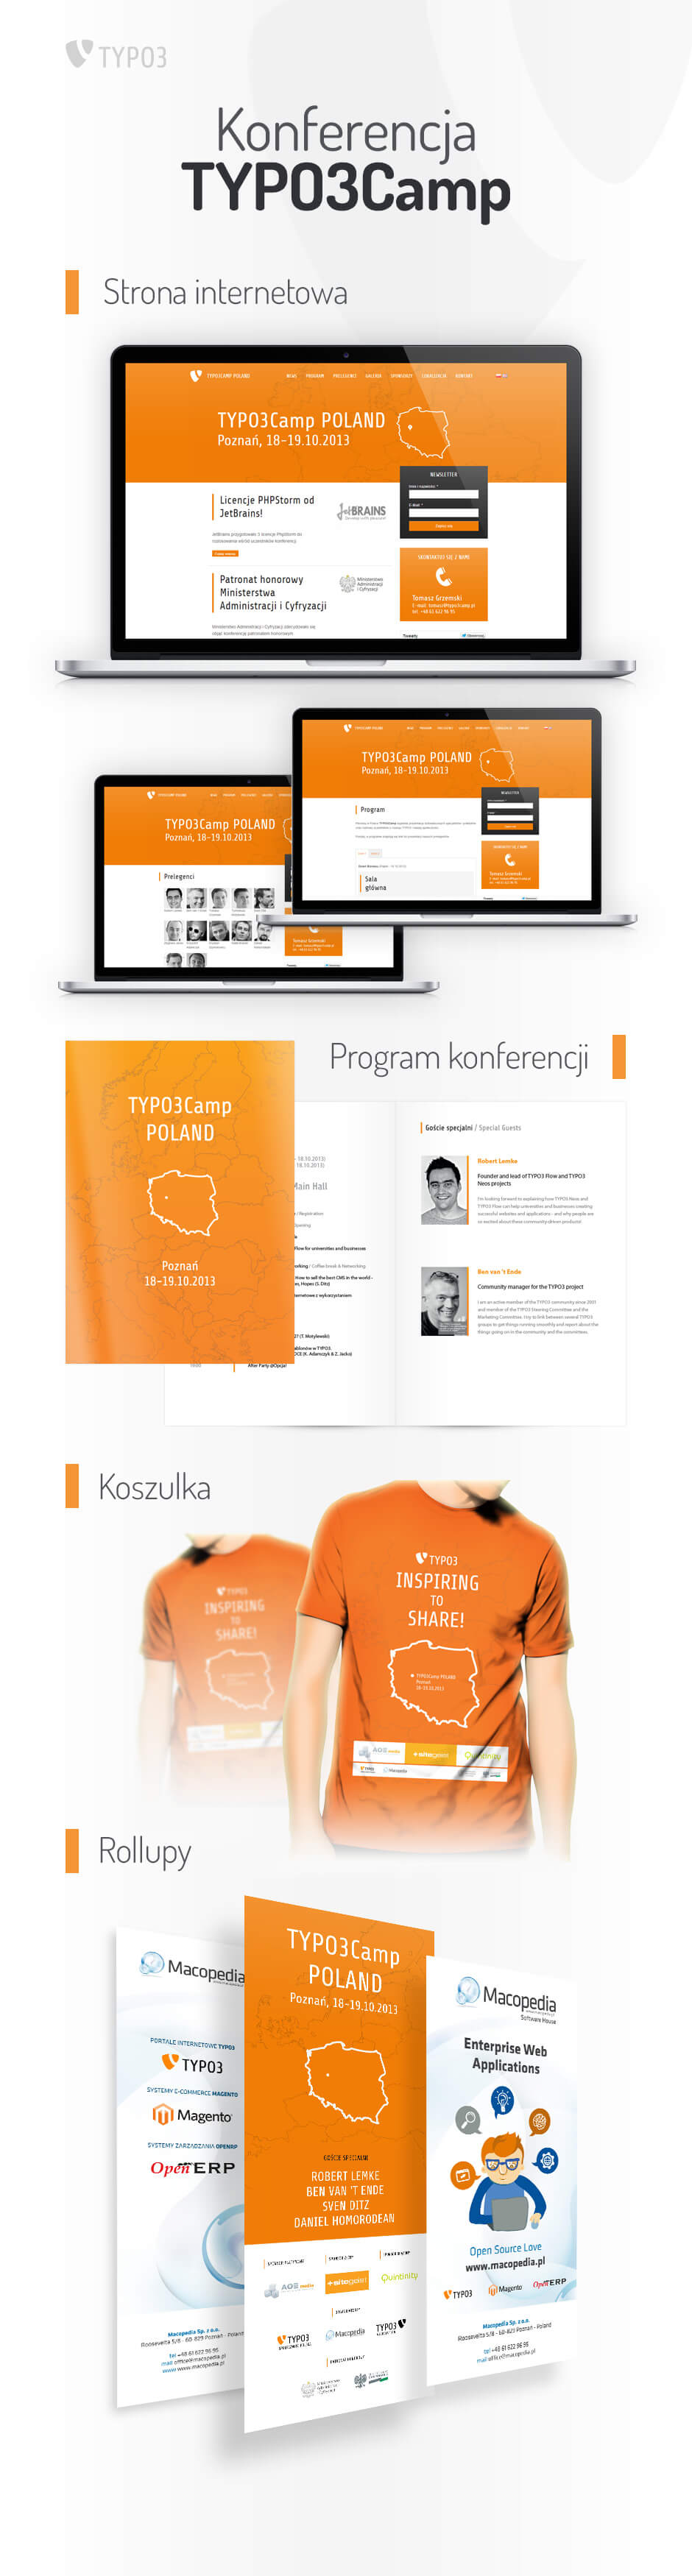 TYPO3 conference